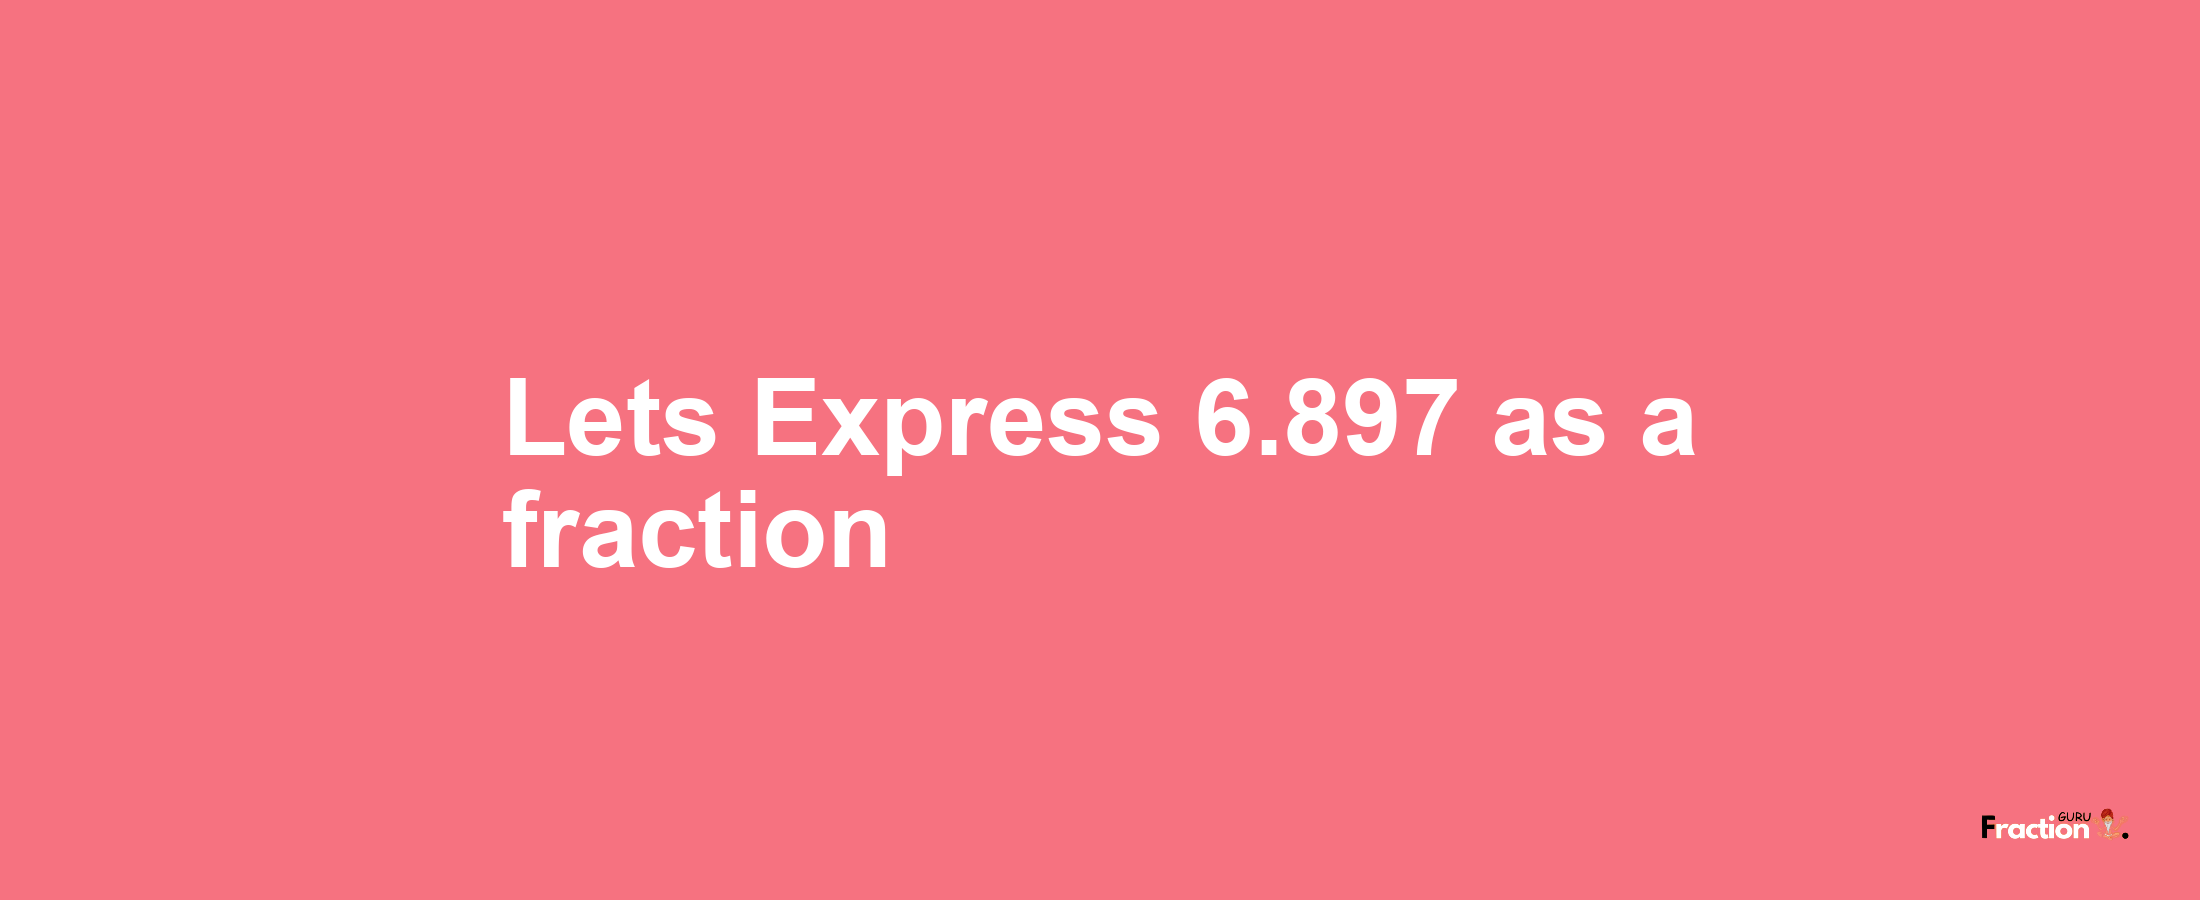 Lets Express 6.897 as afraction